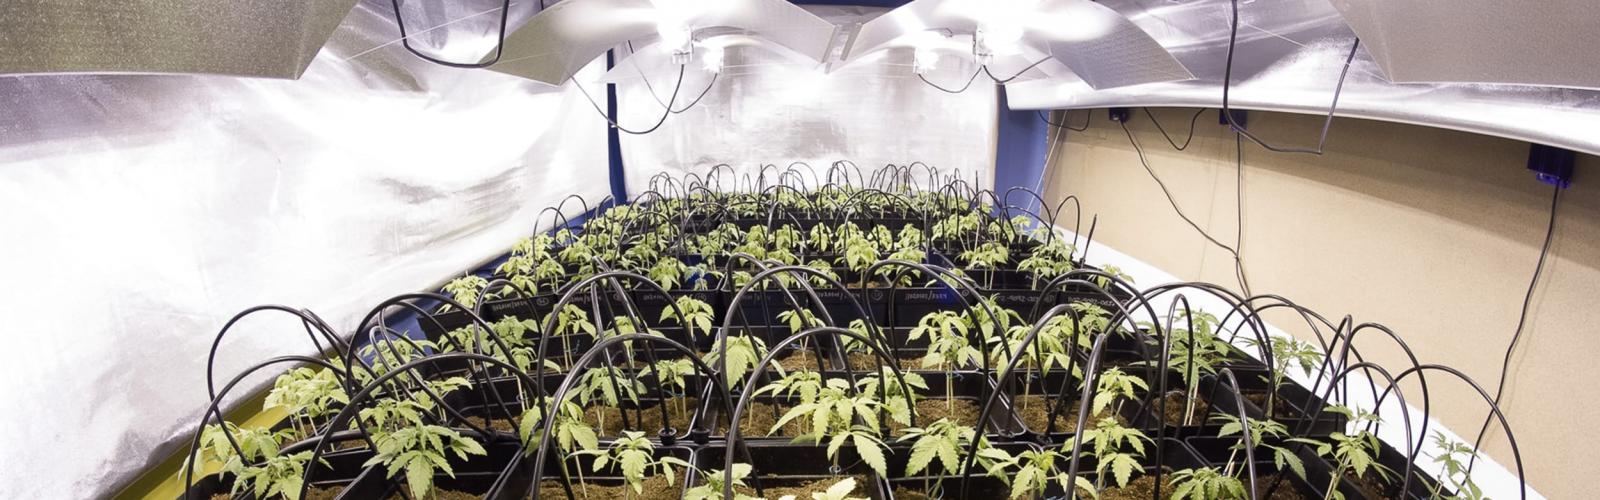 Growing Products by General Hydroponics